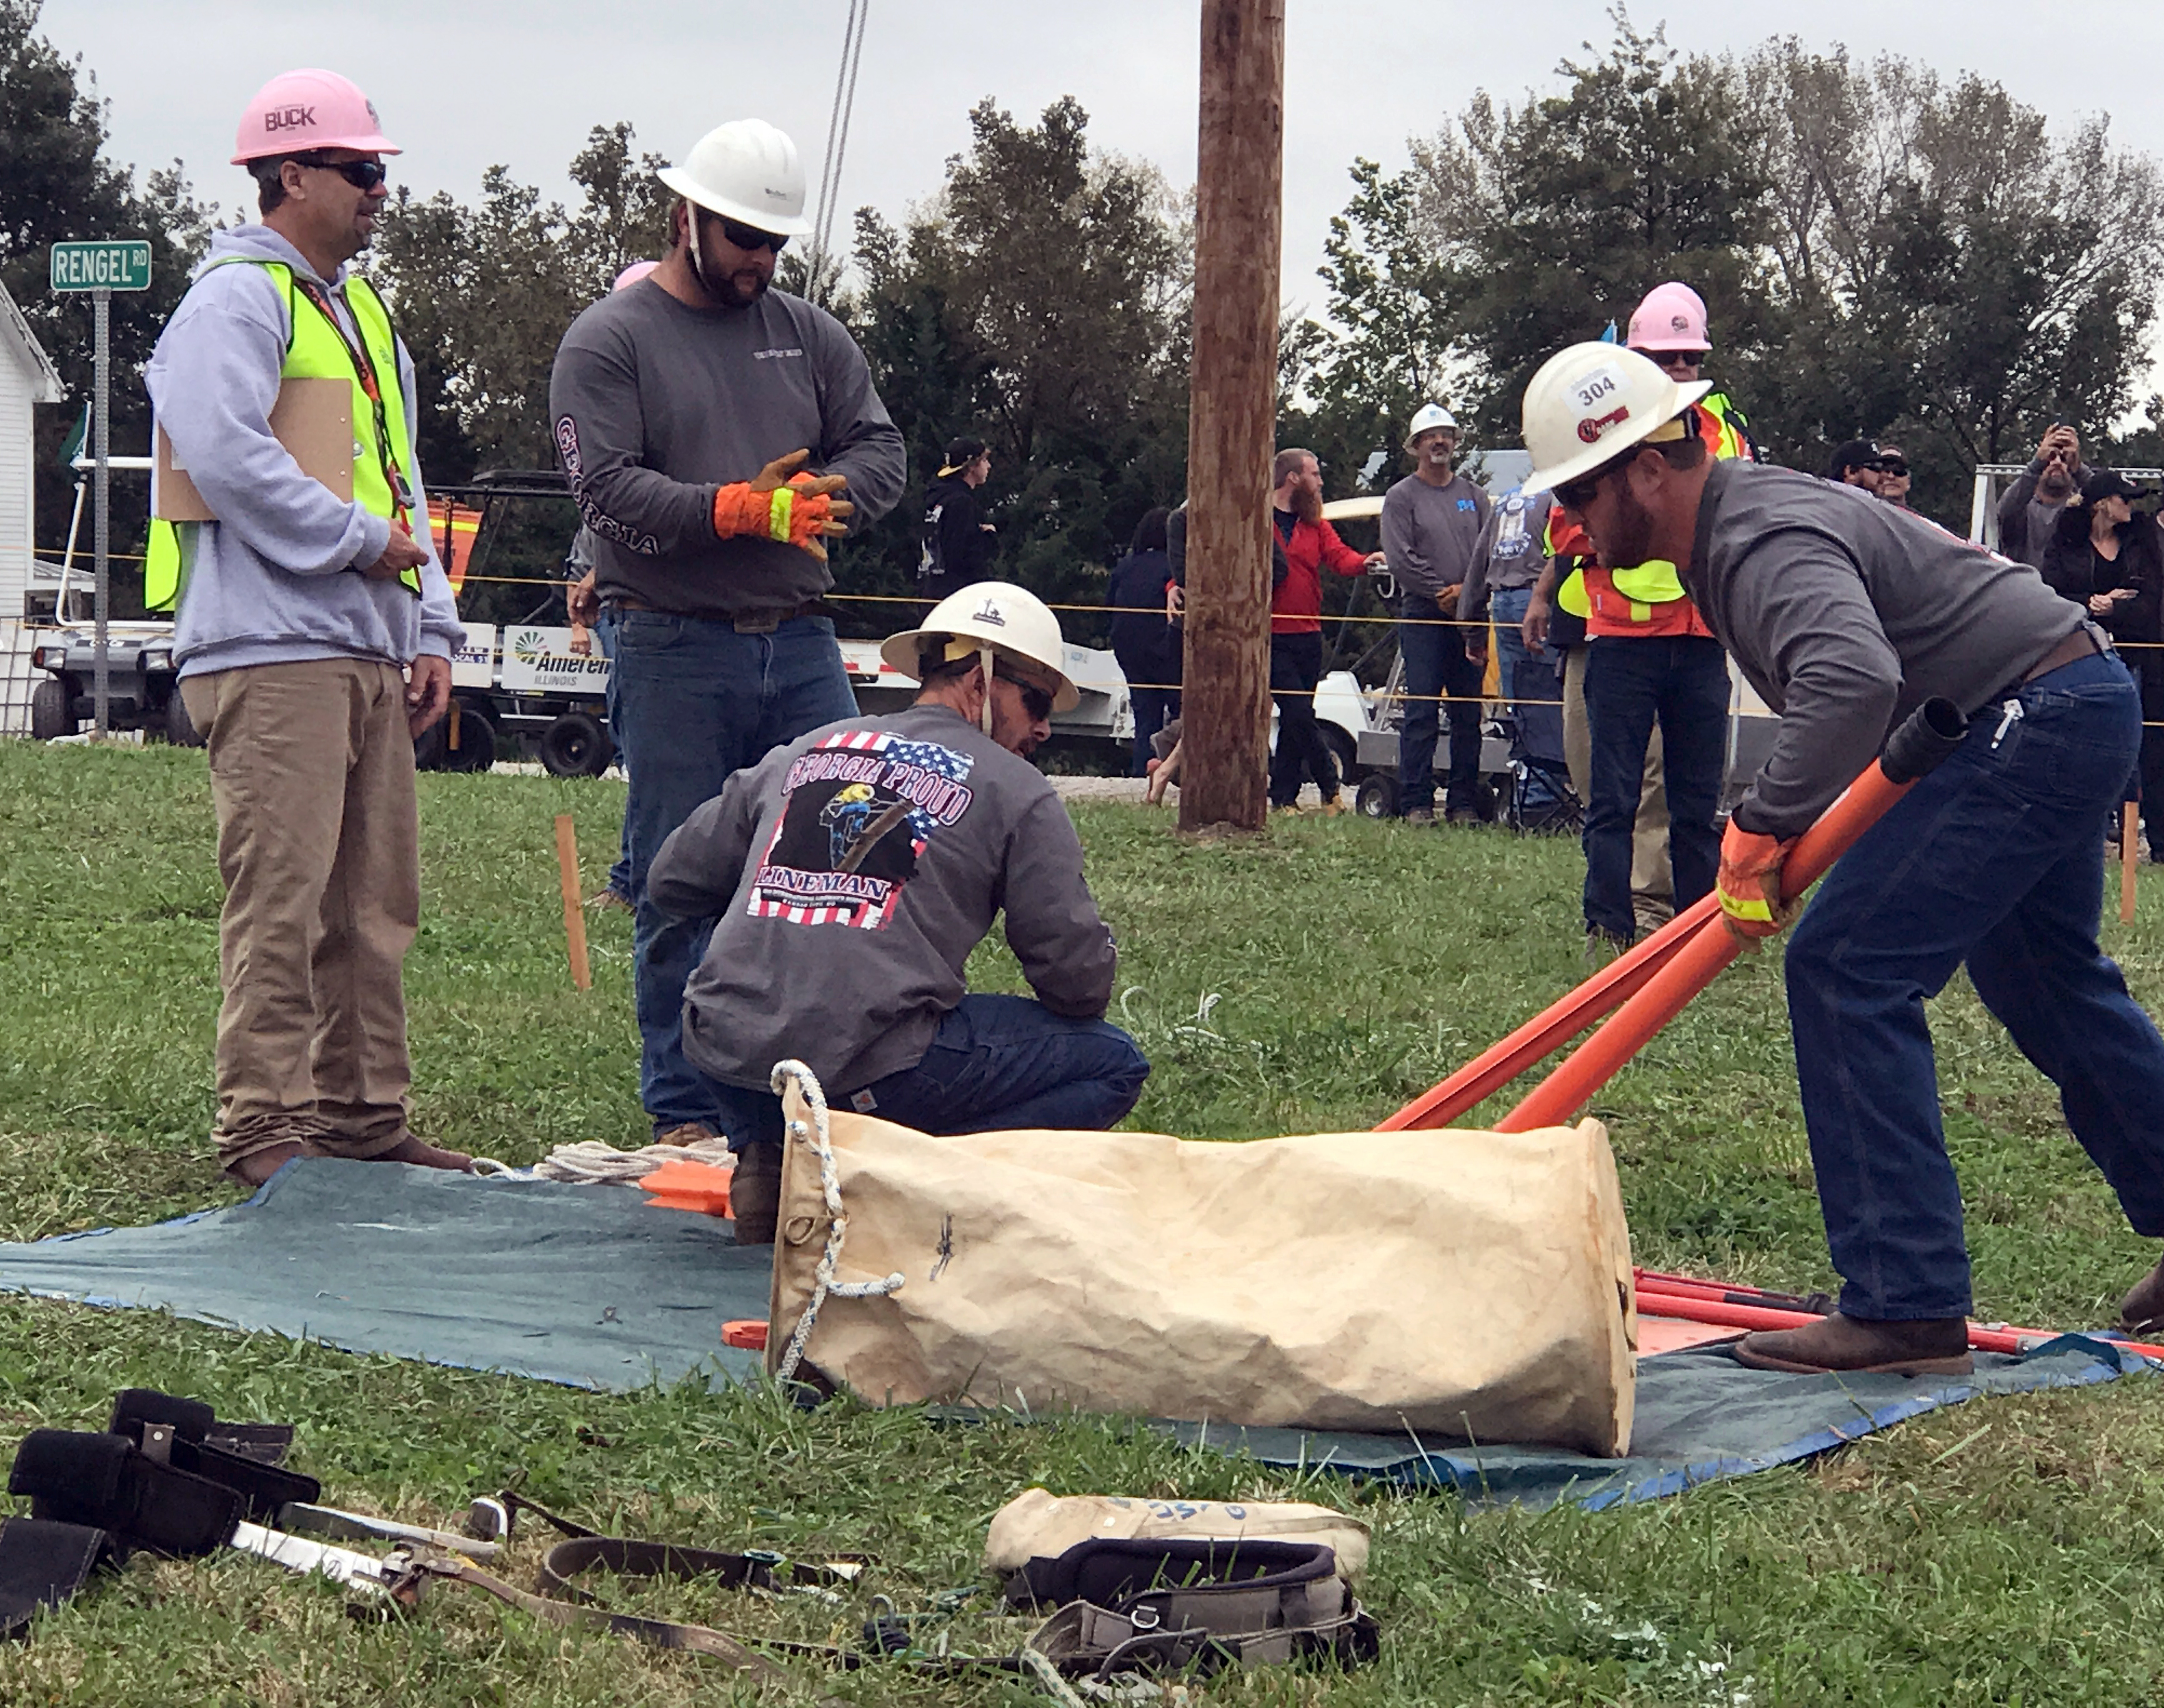 Lineman's rodeo team preparing to compete